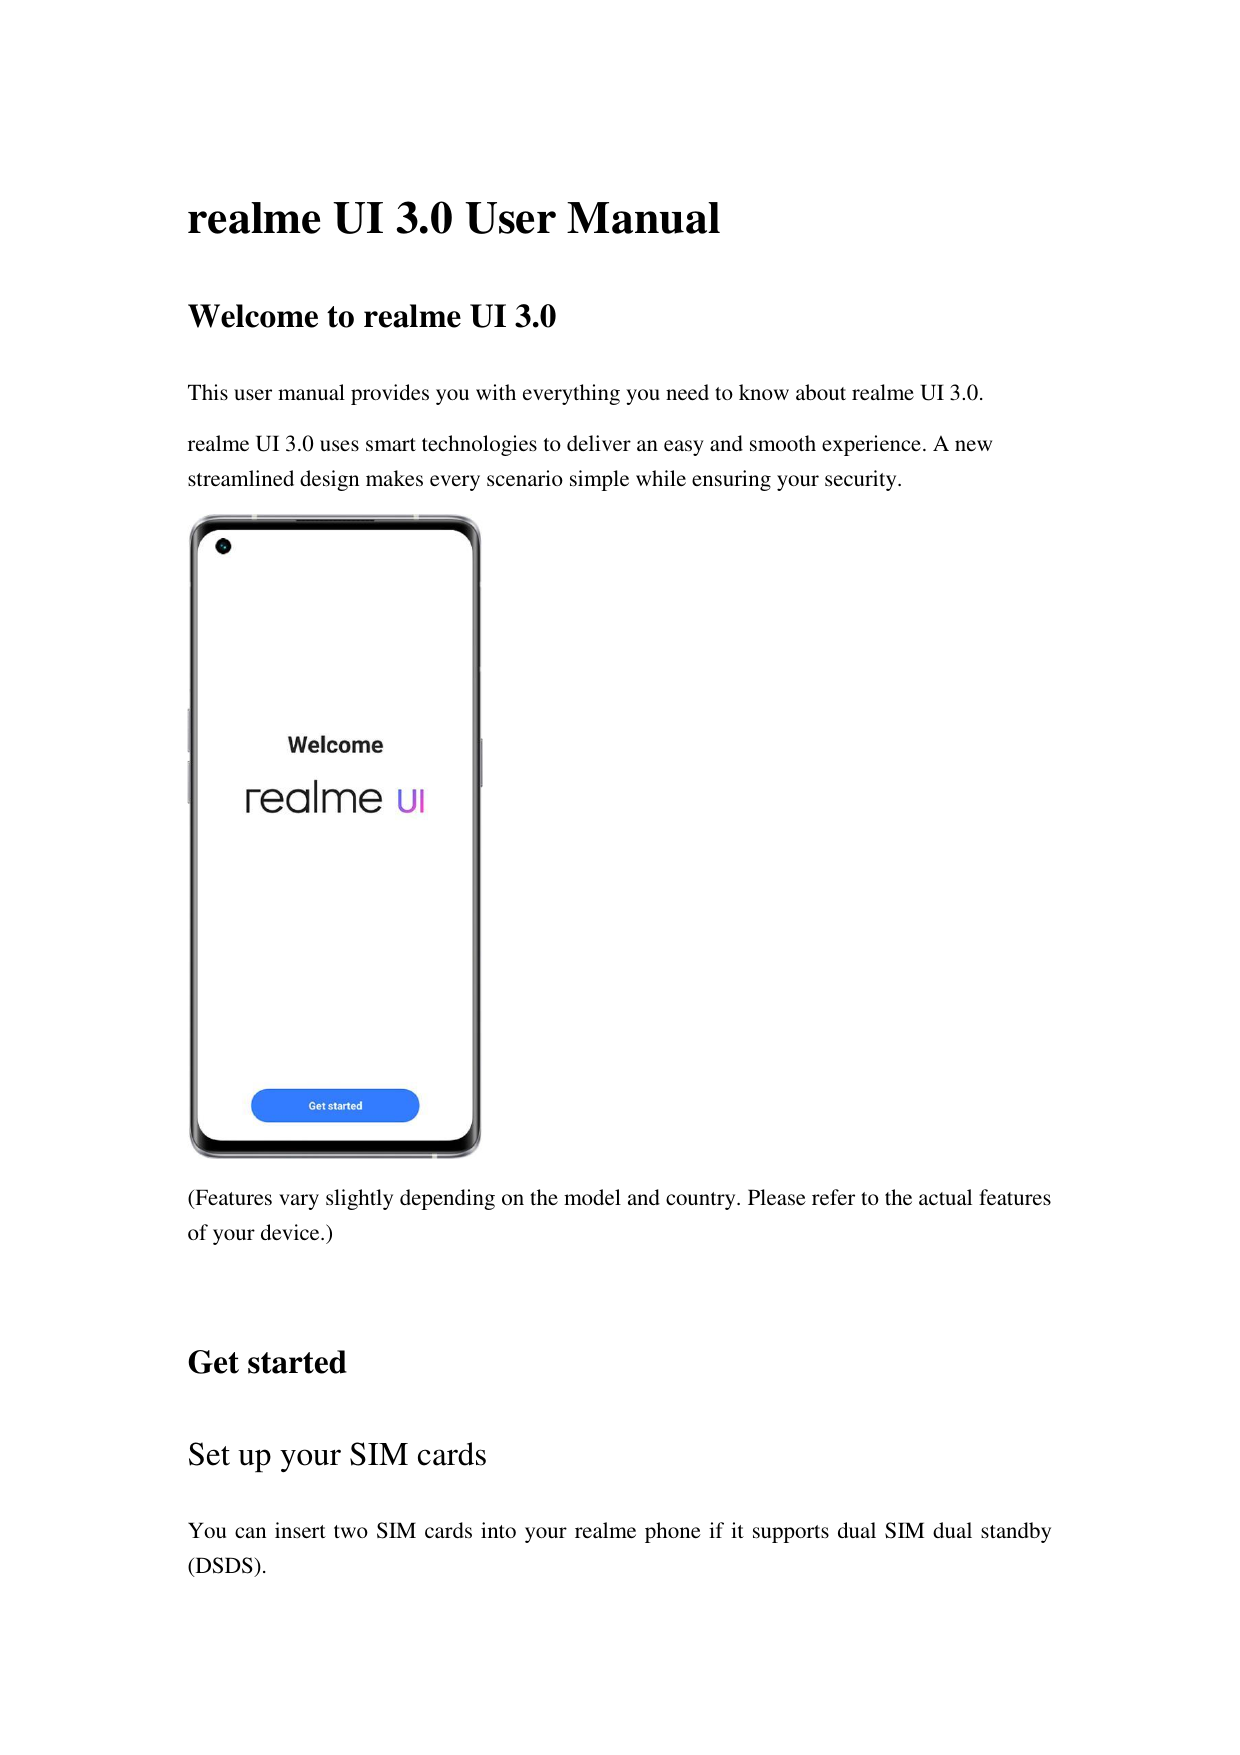 realme UI 3.0 User ManualWelcome to realme UI 3.0This user manual provides you with everything you need to know about realme UI 